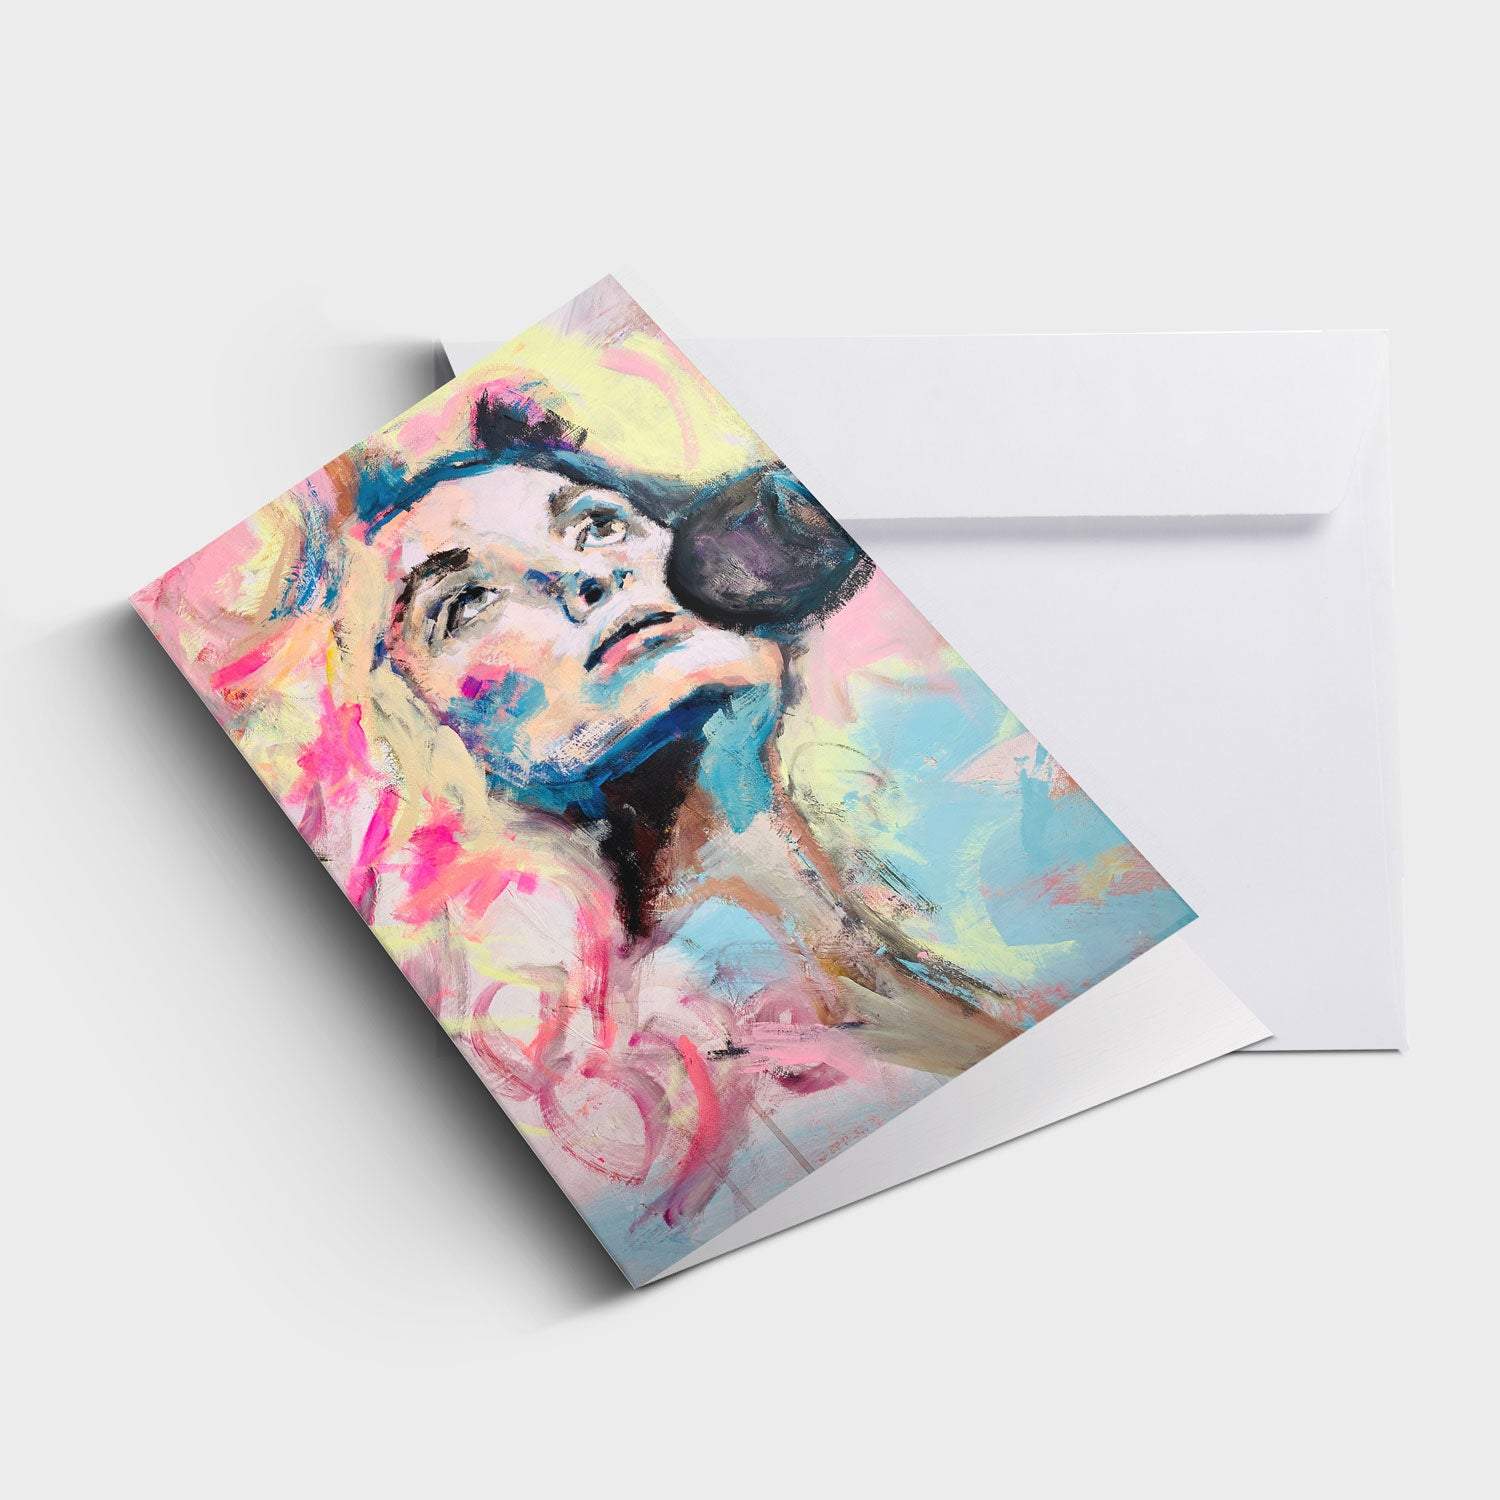 Dolly - Artist by Anissa Marie - Art Print, Decoupage Rice Paper, Flat Canvas Print, Giclee Print, Greeting Card, Photo Paper, Poster Print